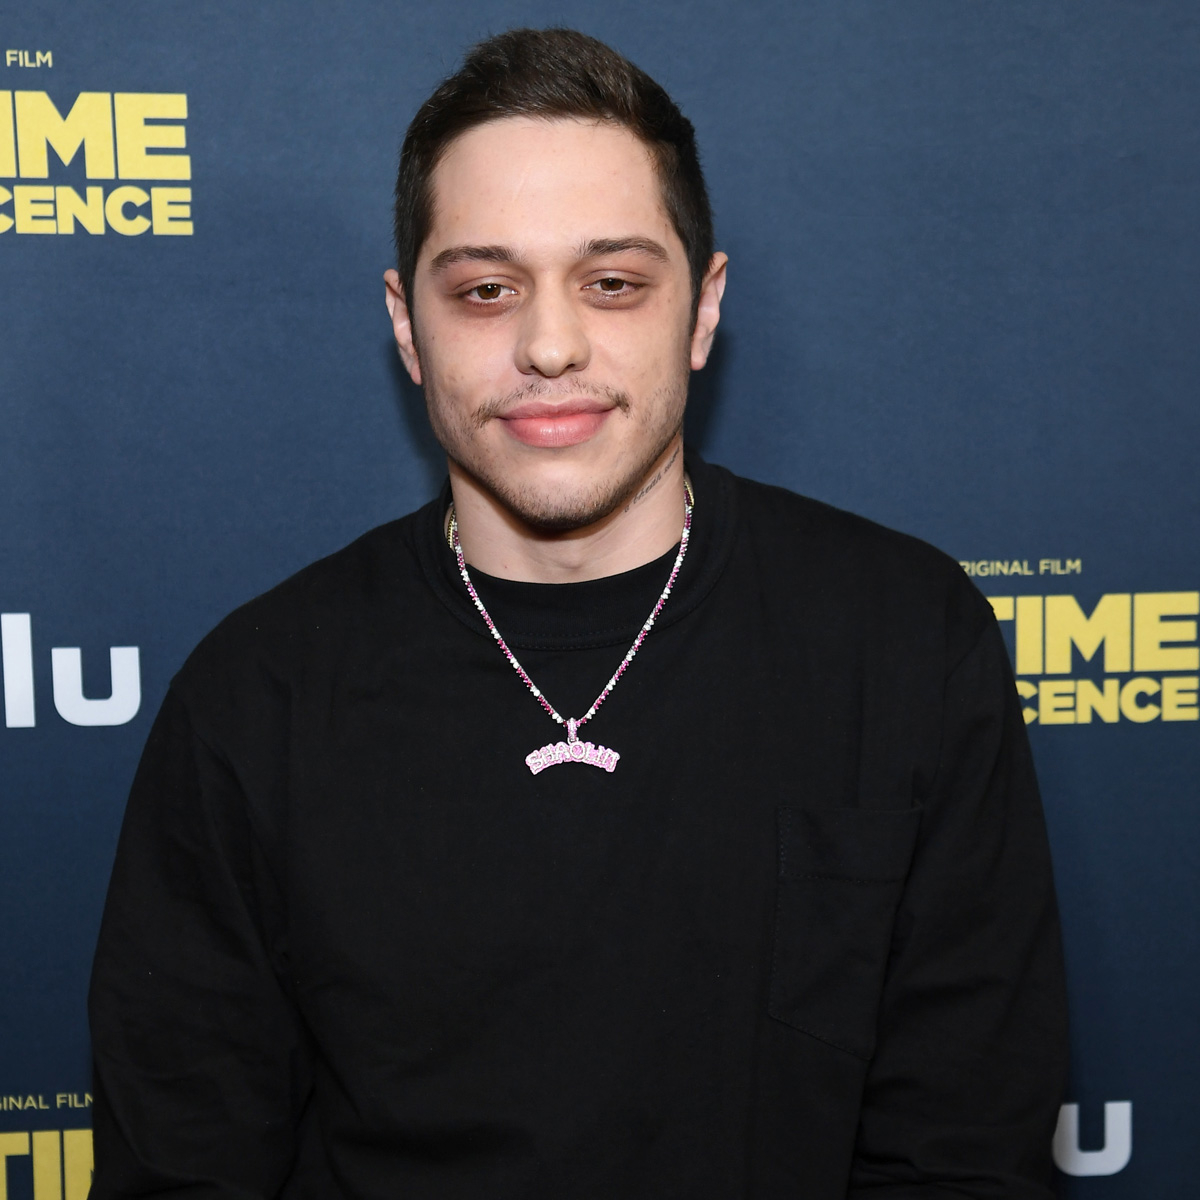 Pete Davidson Gets Community Service Time for Reckless Driving Charge